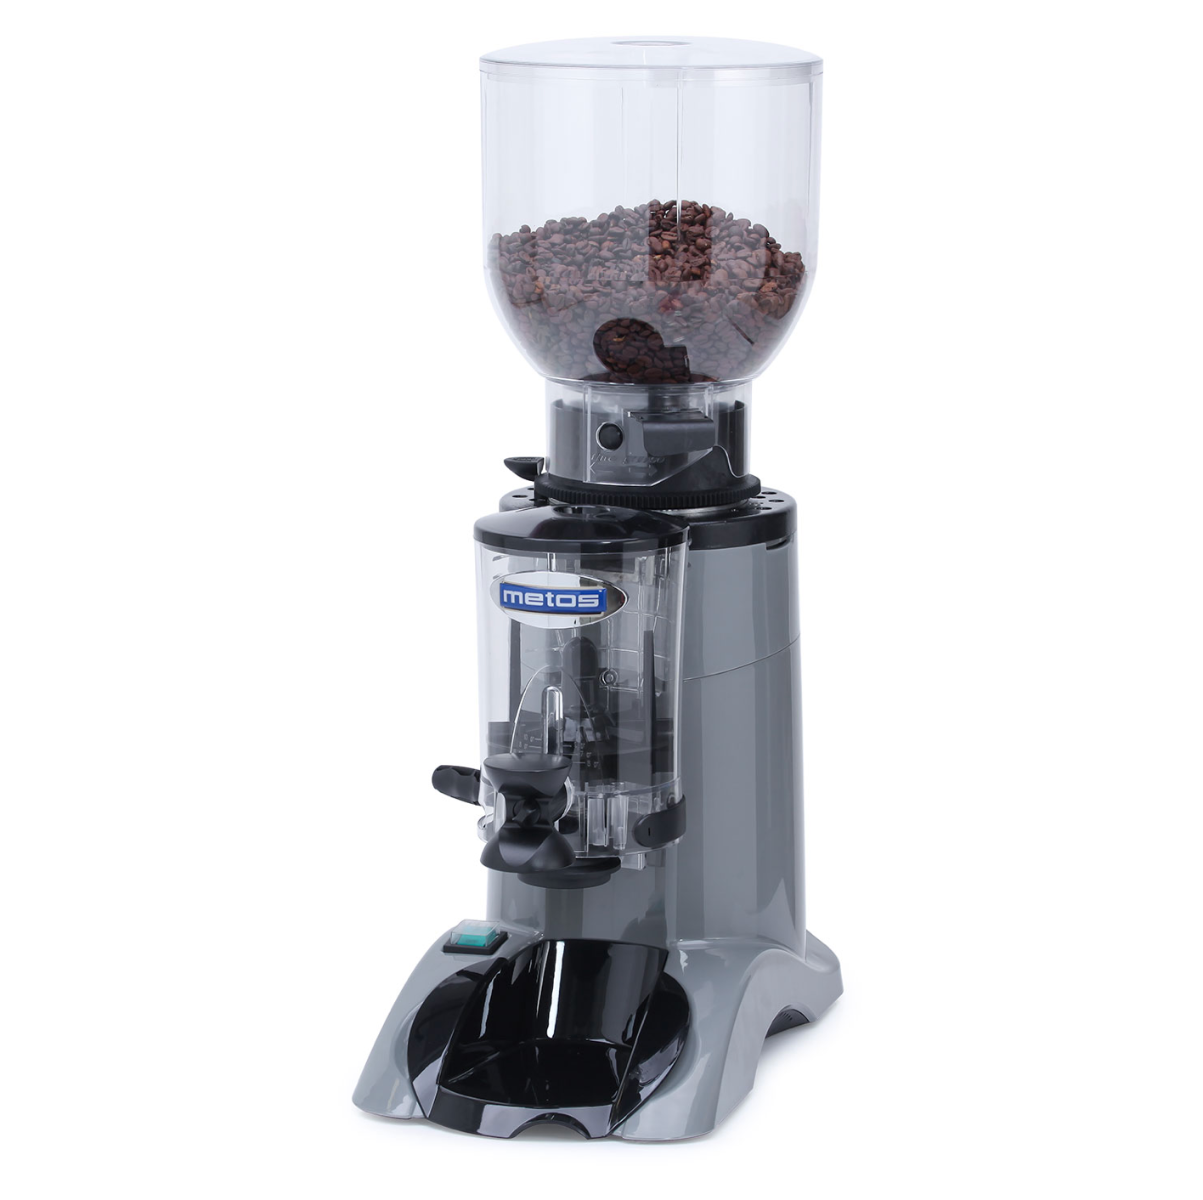 Cunill CT Coffee Grinder